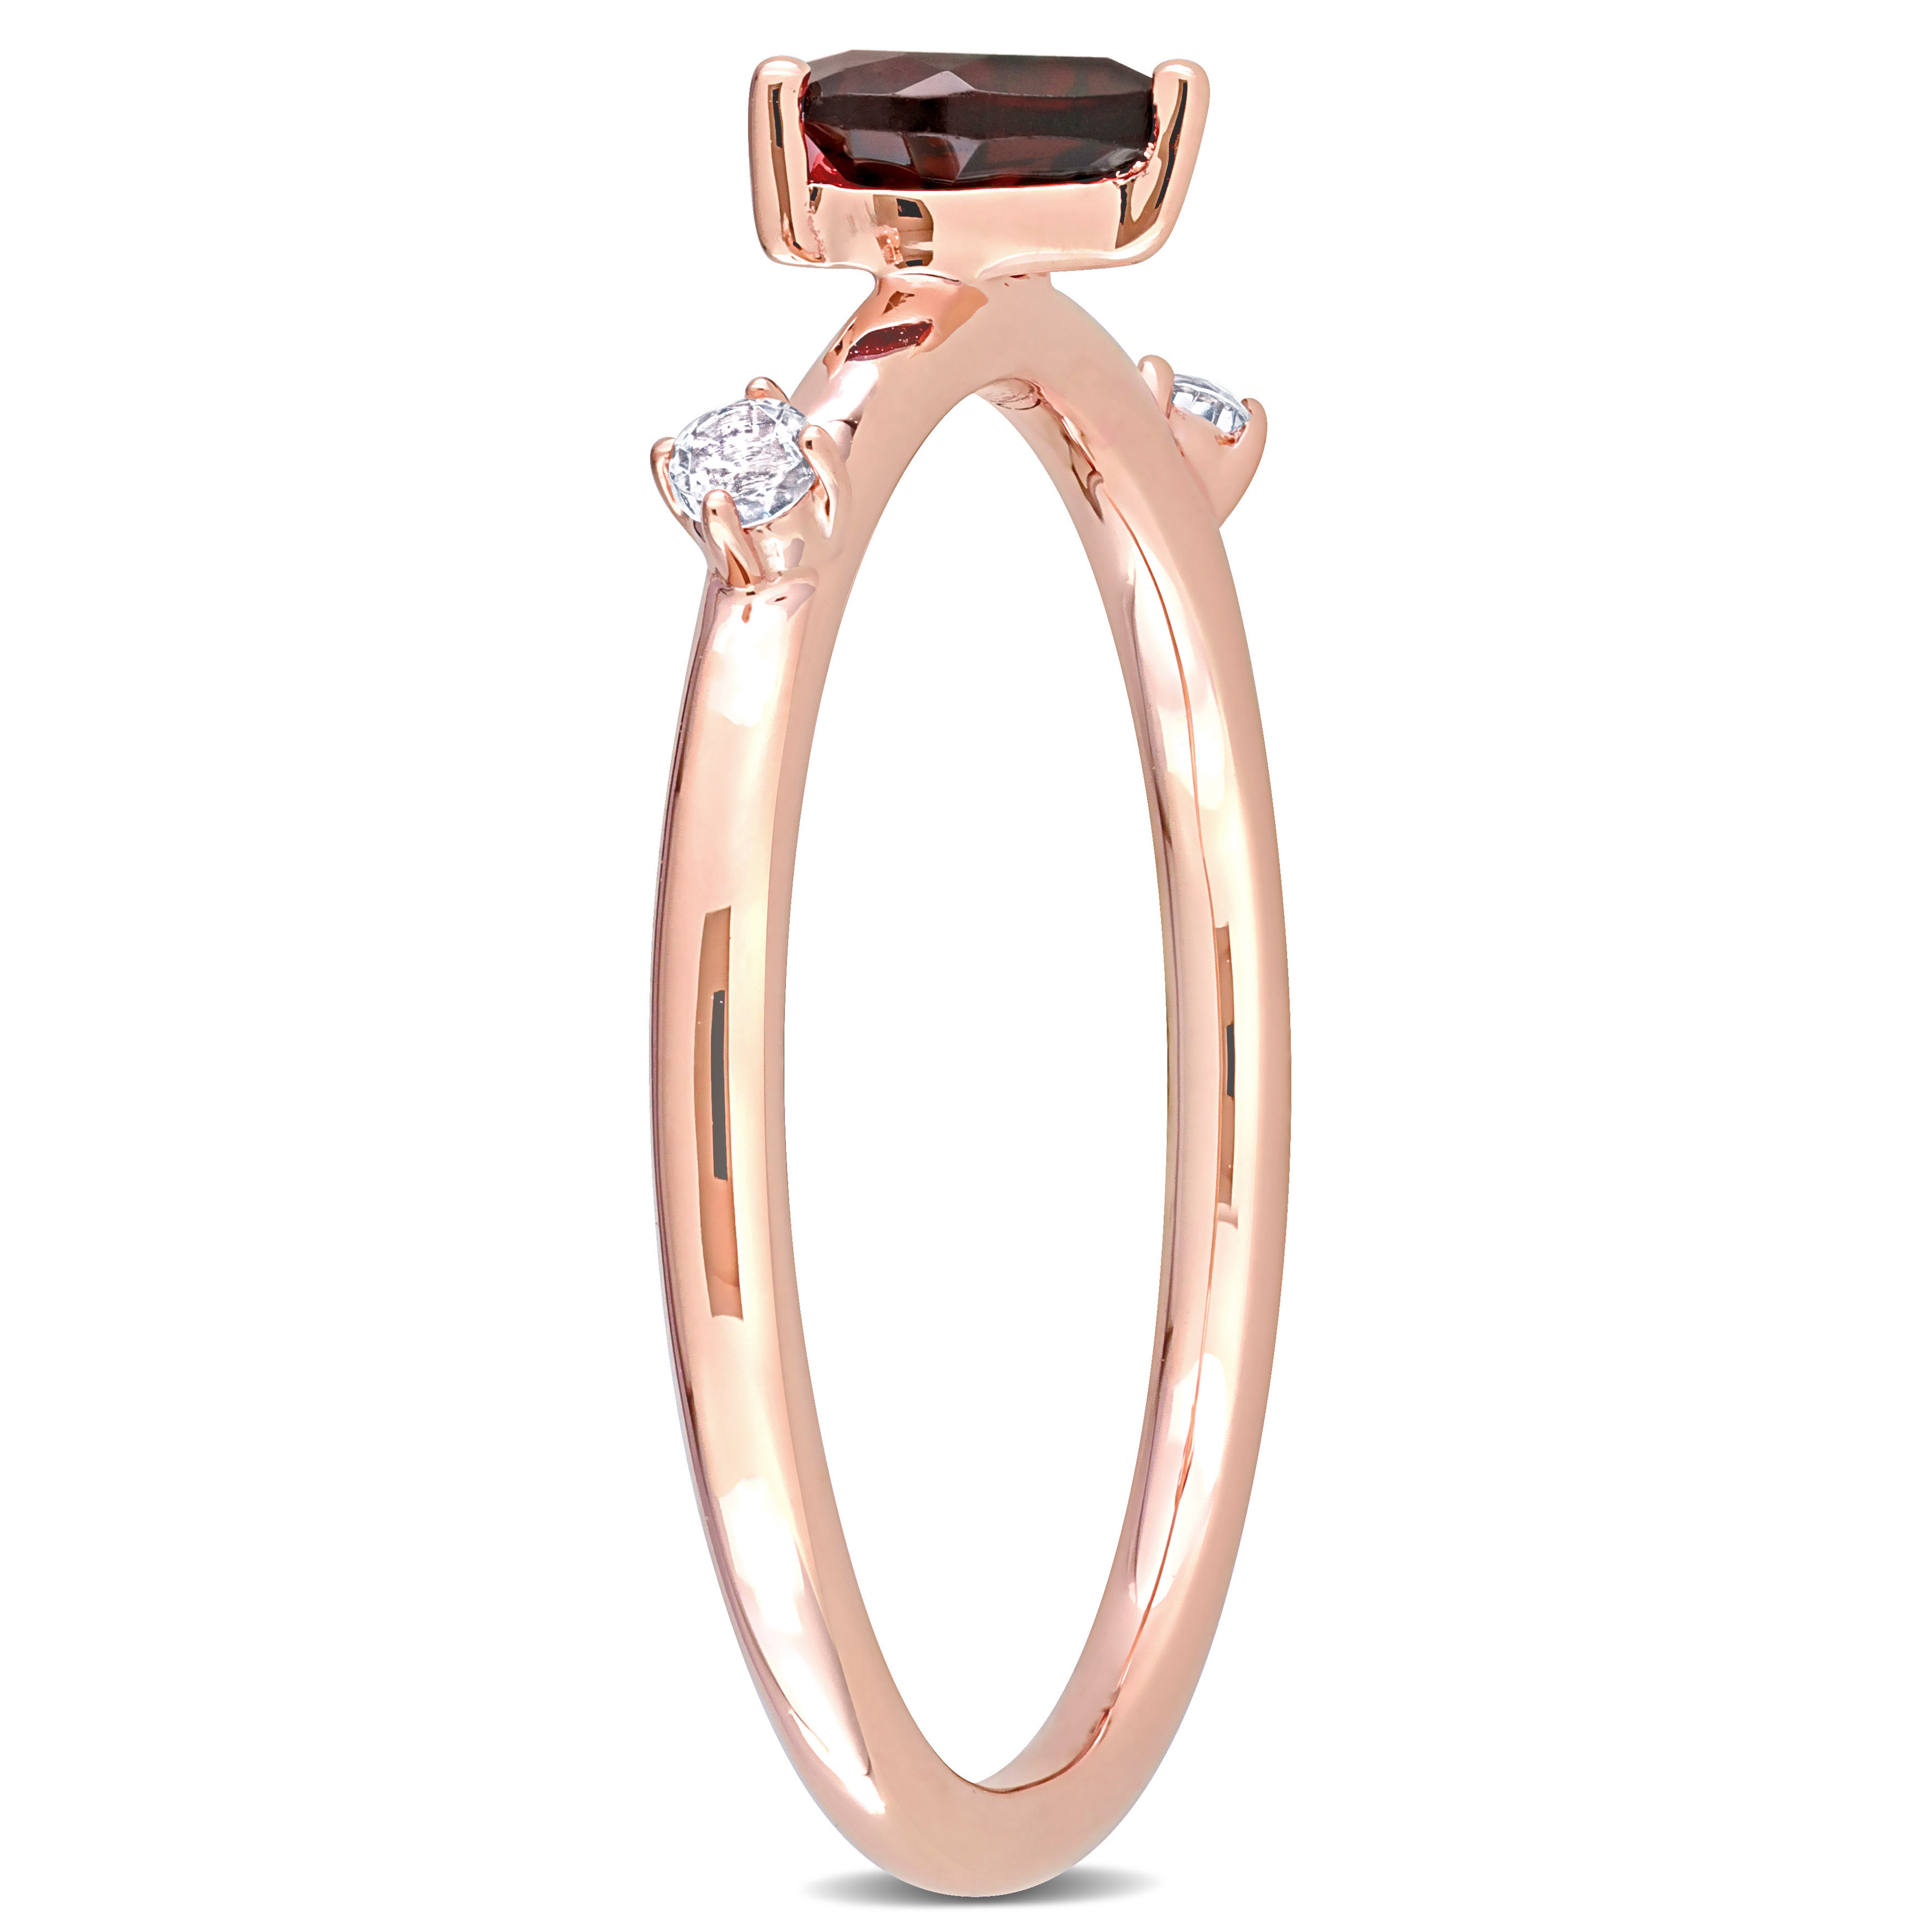 5/8 CT TGW Heart Garnet and White Topaz Stackable Ring in 10k Rose Gold